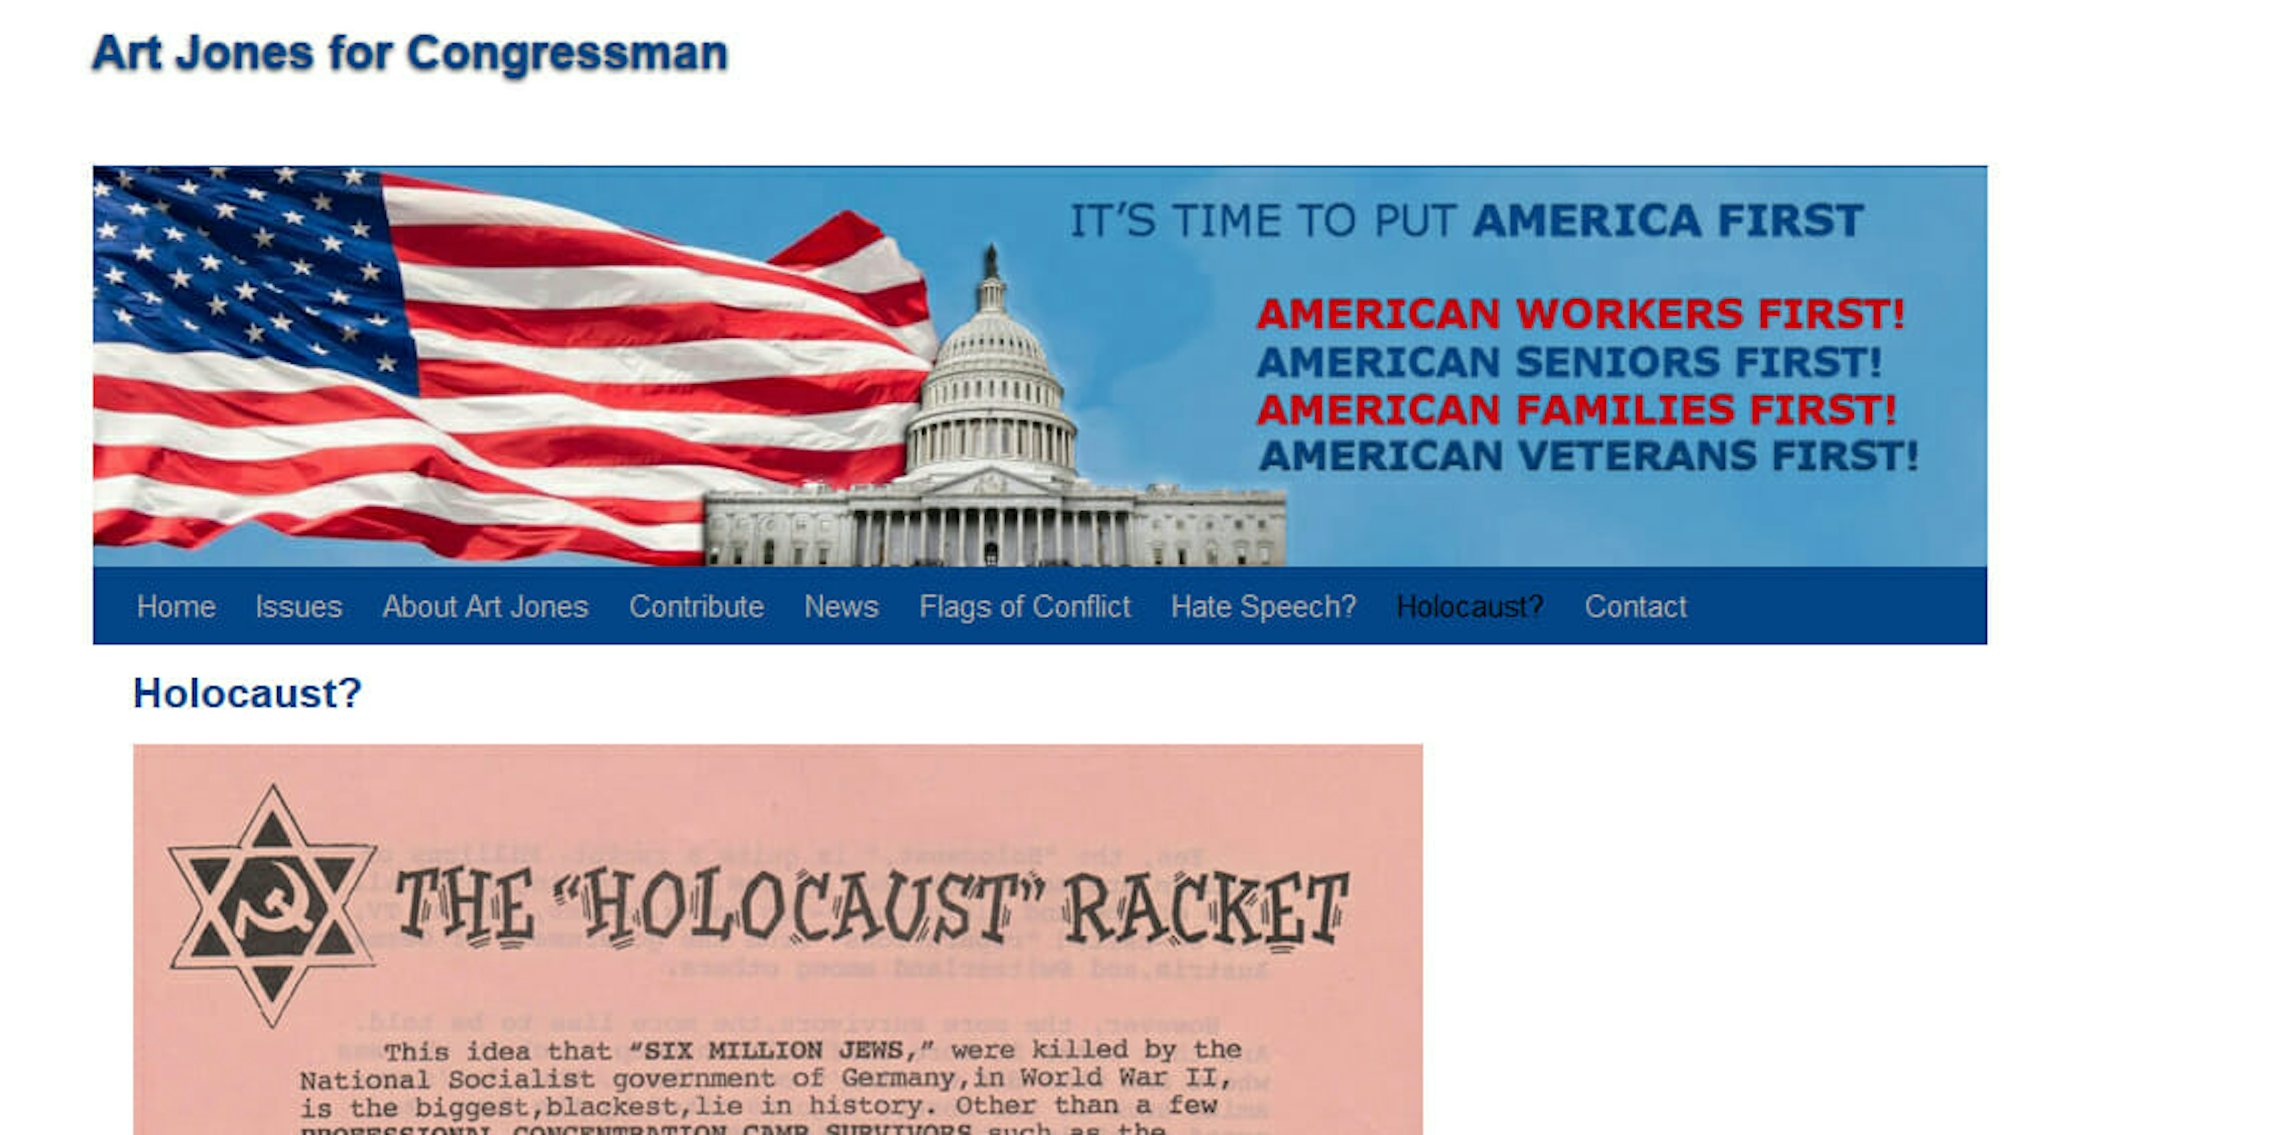 A 70-year-old man with an entire section of his campaign website dedicated to Holocaust denial is expected to be the only Republican option during the GOP primary next month in Illinois' 3rd Congressional district.